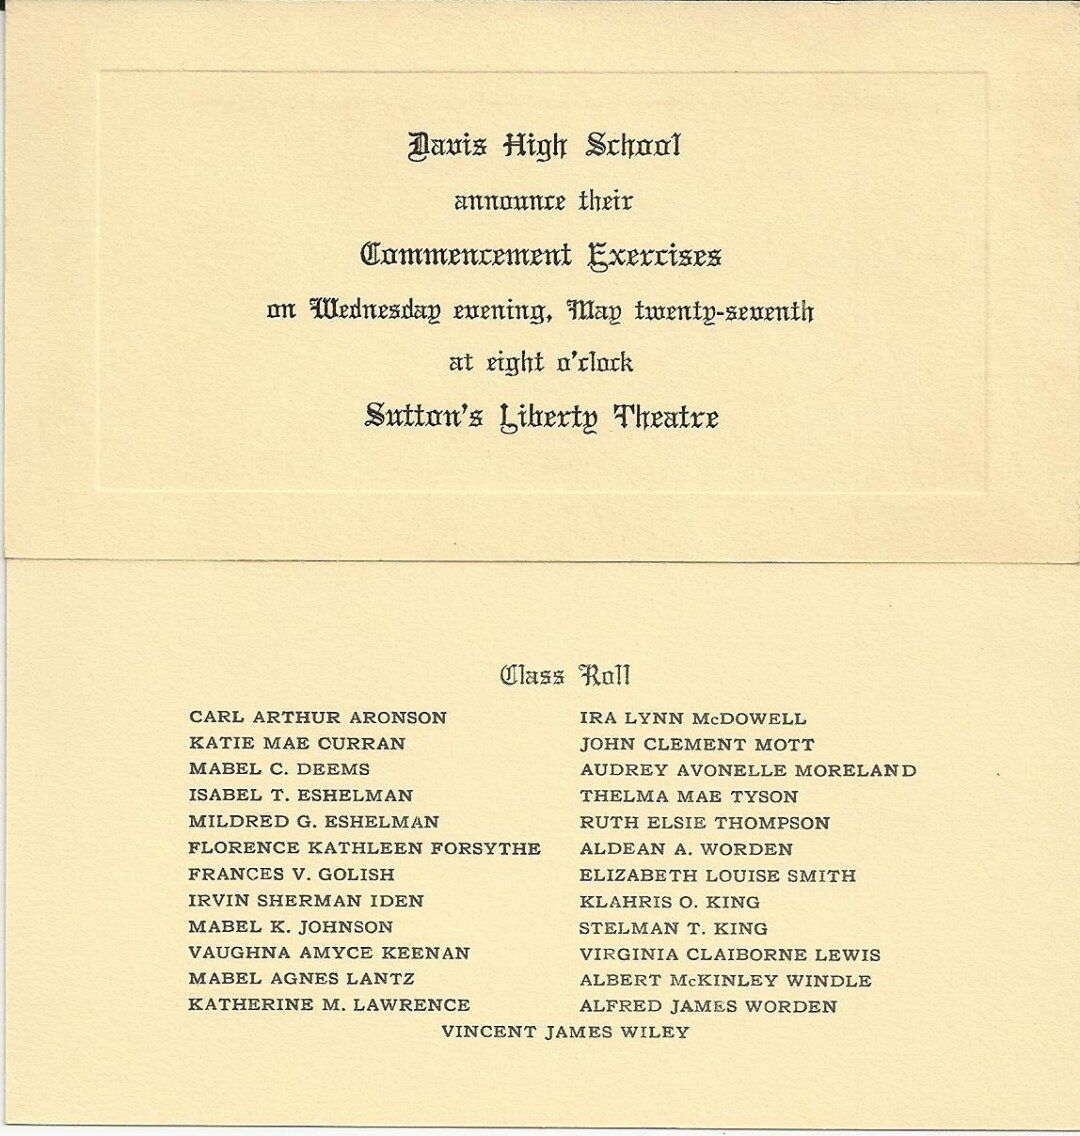 Ninety-three years ago tonight, Davis High School held its graduation commencement at Cottrill&rsquo;s Opera House (then known as &ldquo;Sutton&rsquo;s Liberty Theatre&rdquo;).

Do you recognize any of the names from the class of 1925?